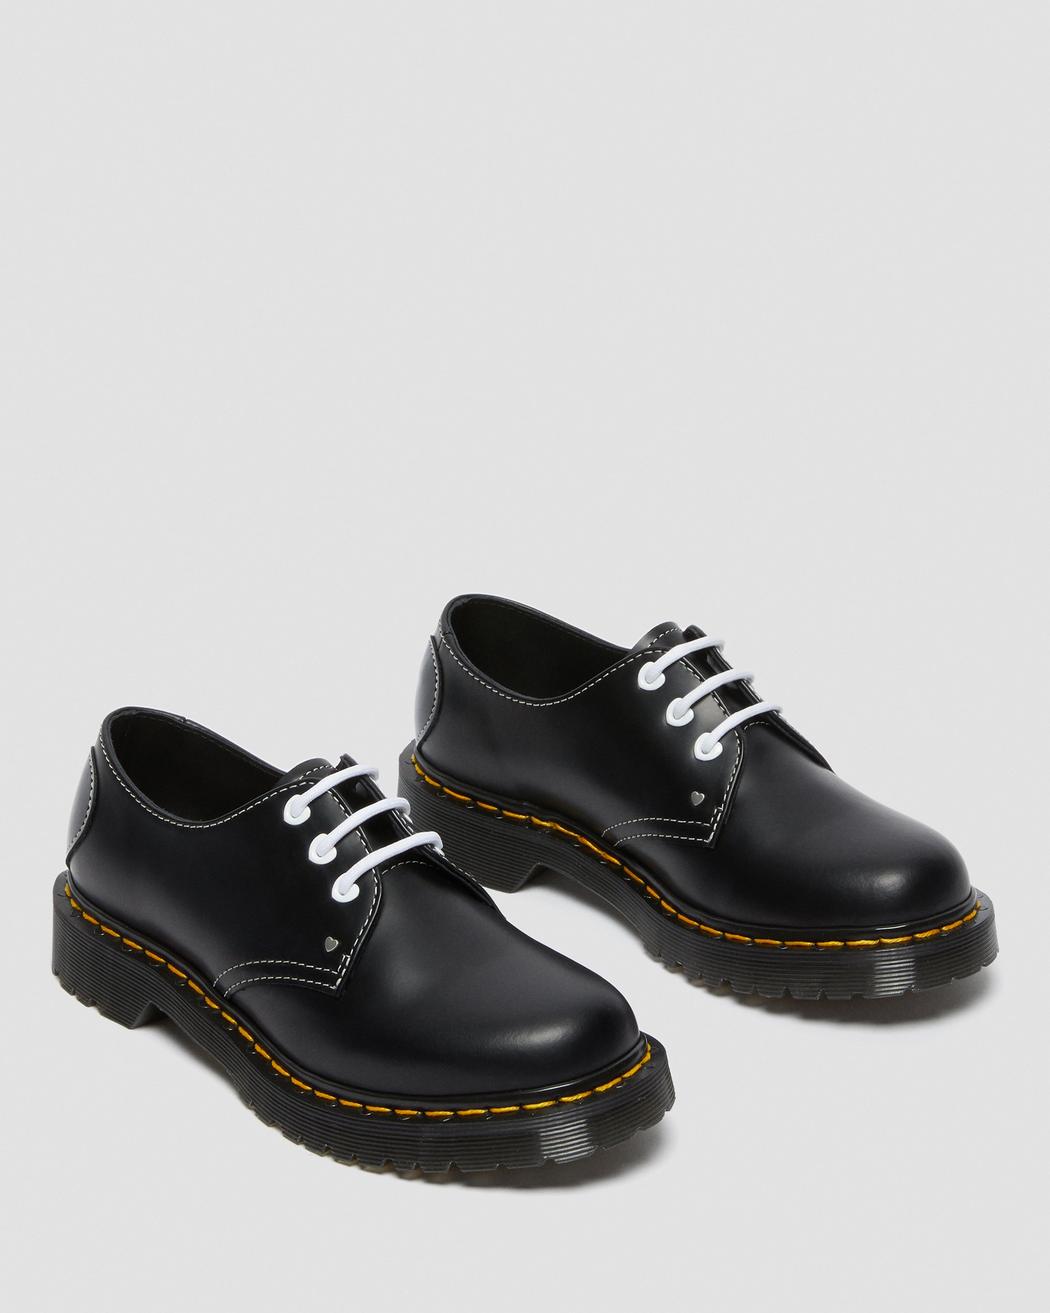 1461 HEARTS BLACK SMOOTH+PATENT OXFORD SHOE